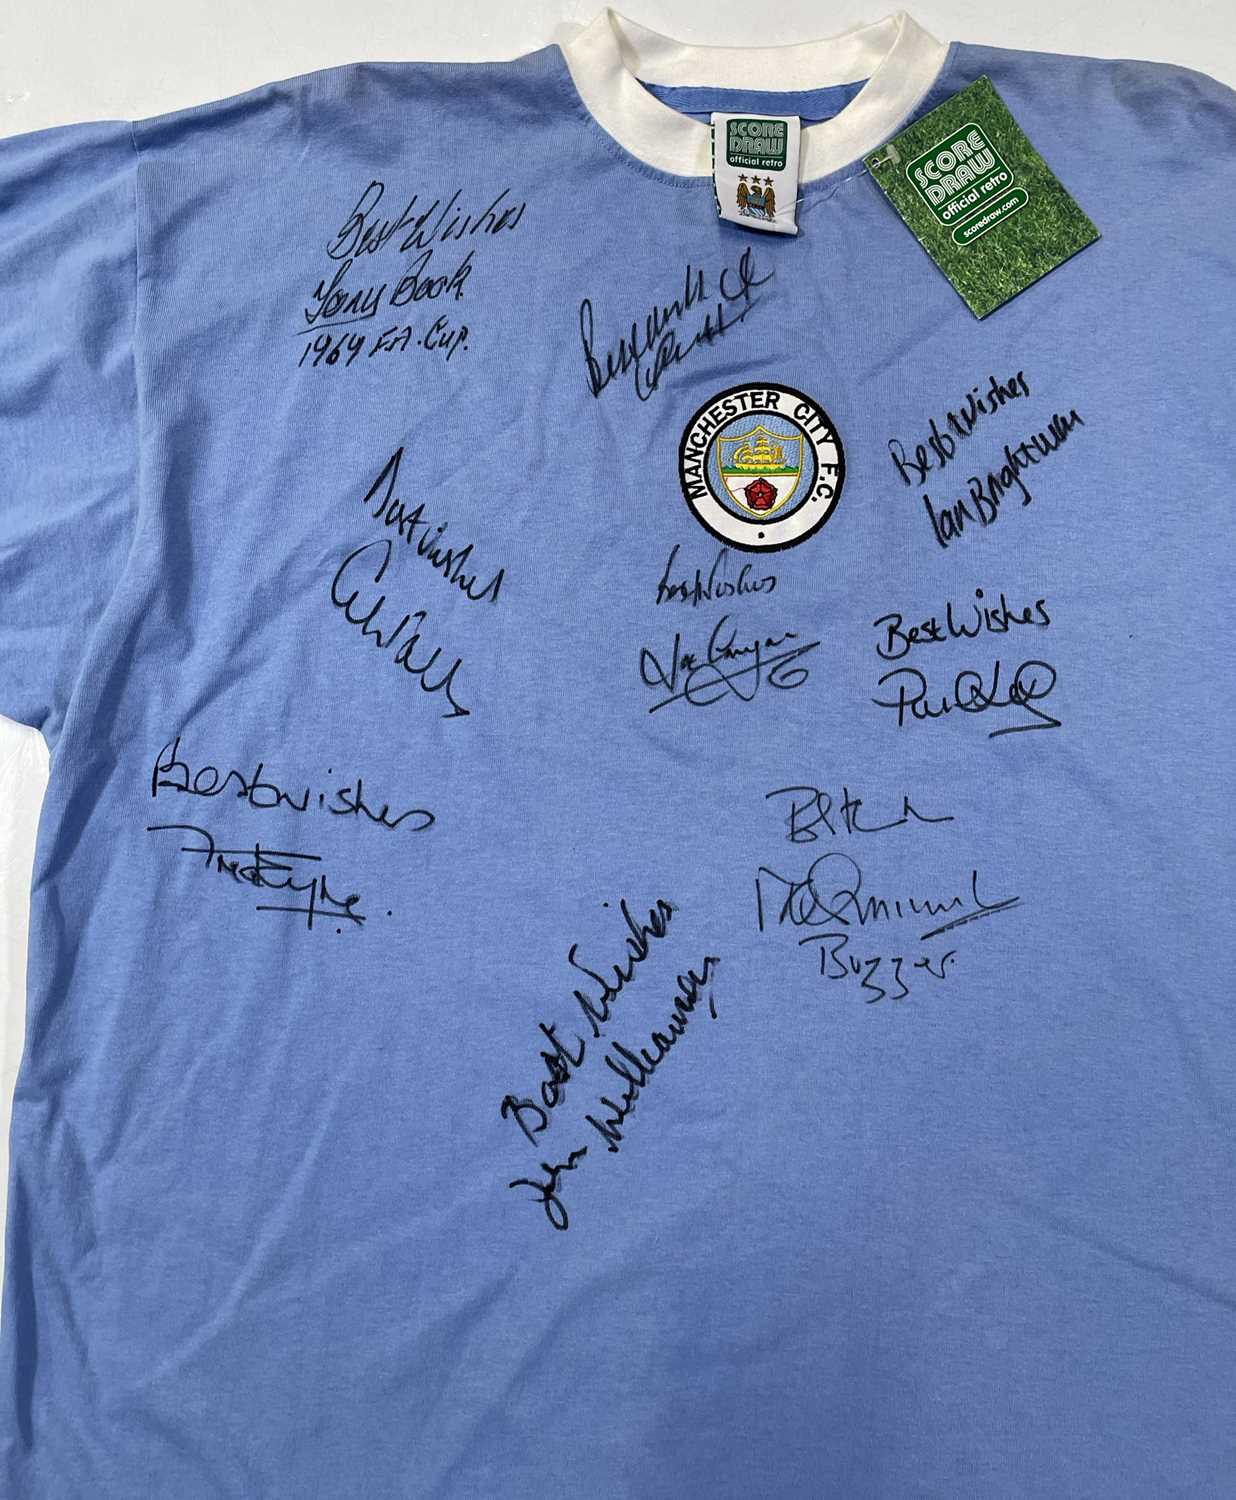 MANCHESTER CITY - MULTI-SIGNED LEGENDS FOOTBALL SHIRT AND SIGNED PENNANT. - Image 3 of 3